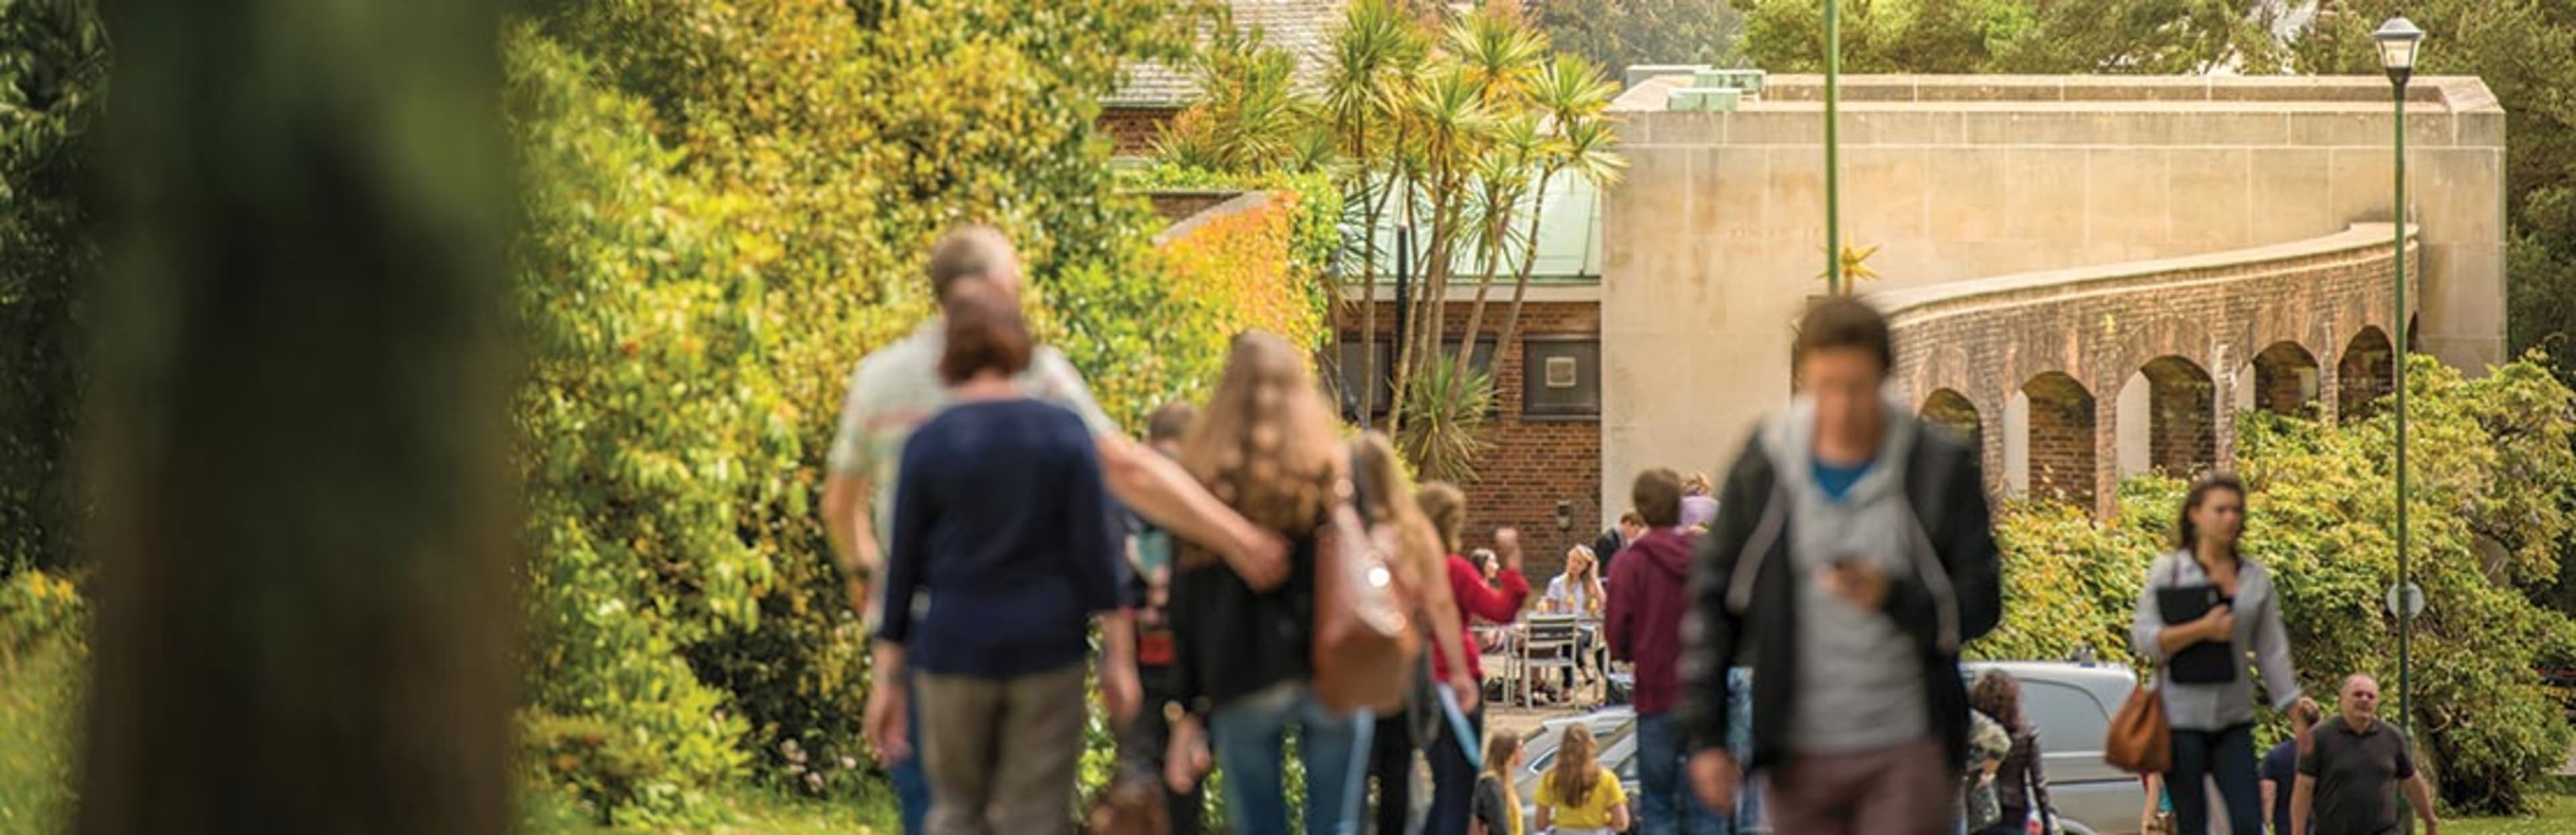 A view of Exeter University students walking on campus